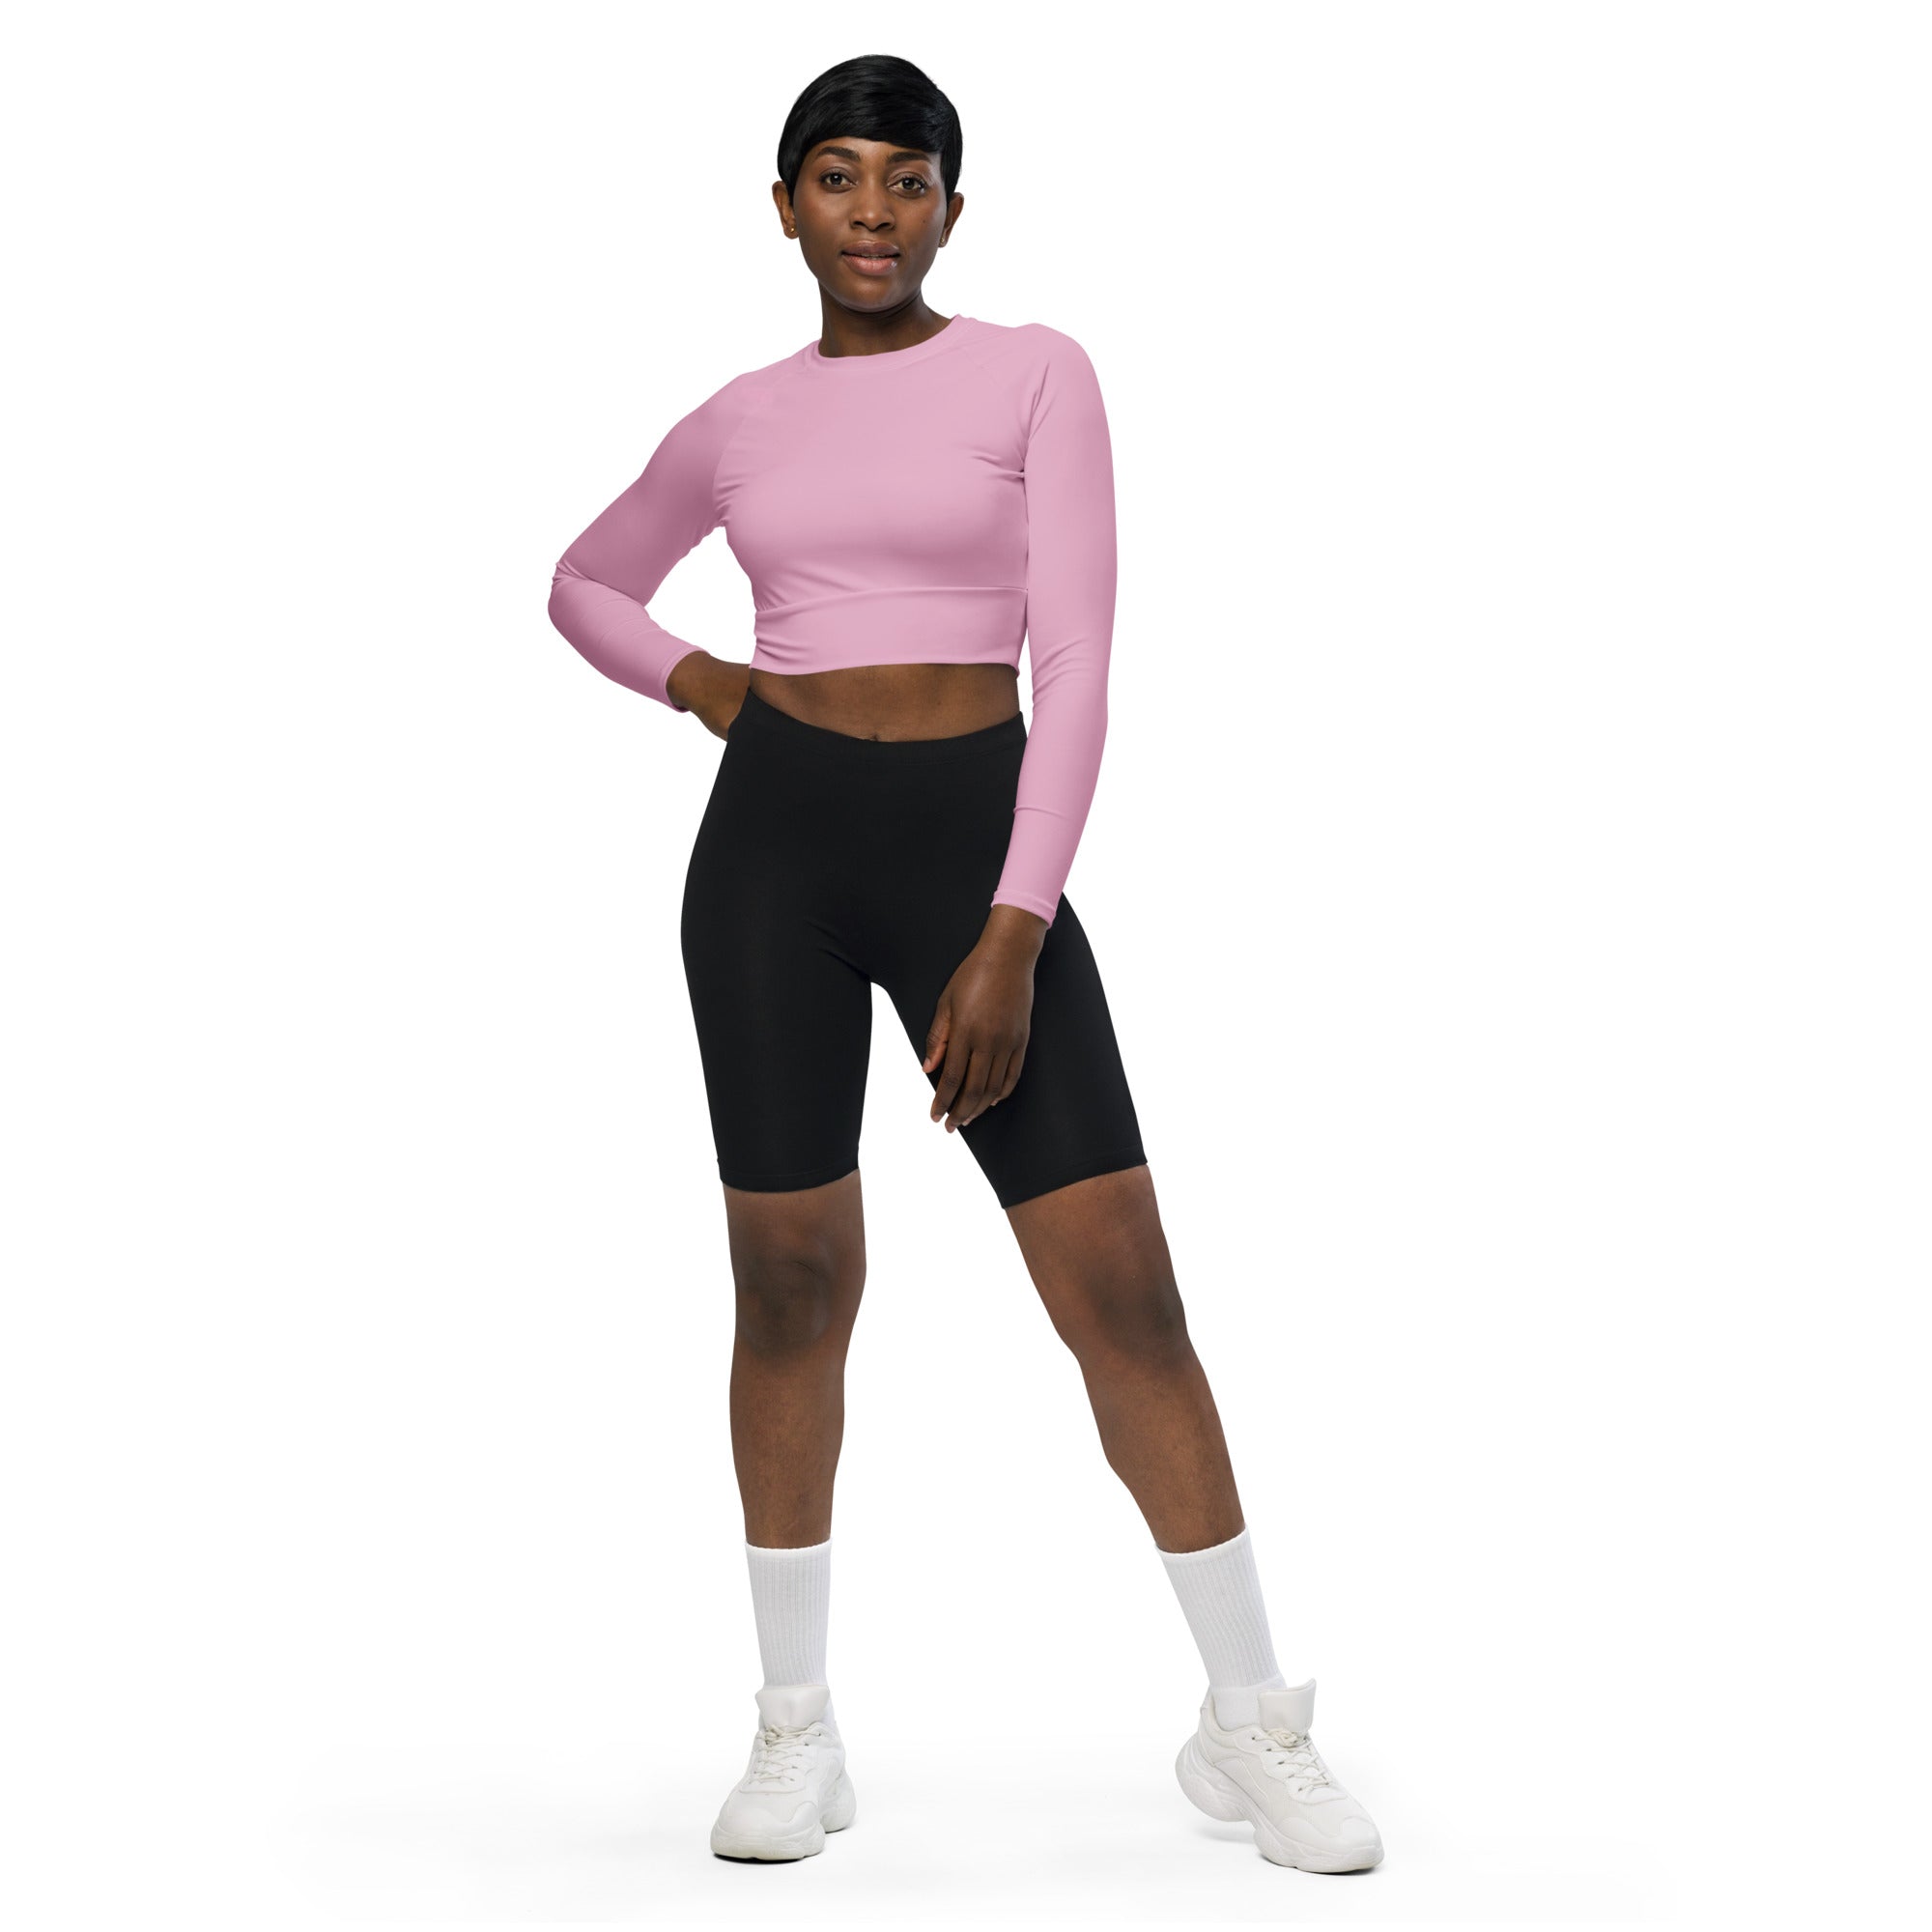 Blush Pink Recycled Long-sleeve Crop Top